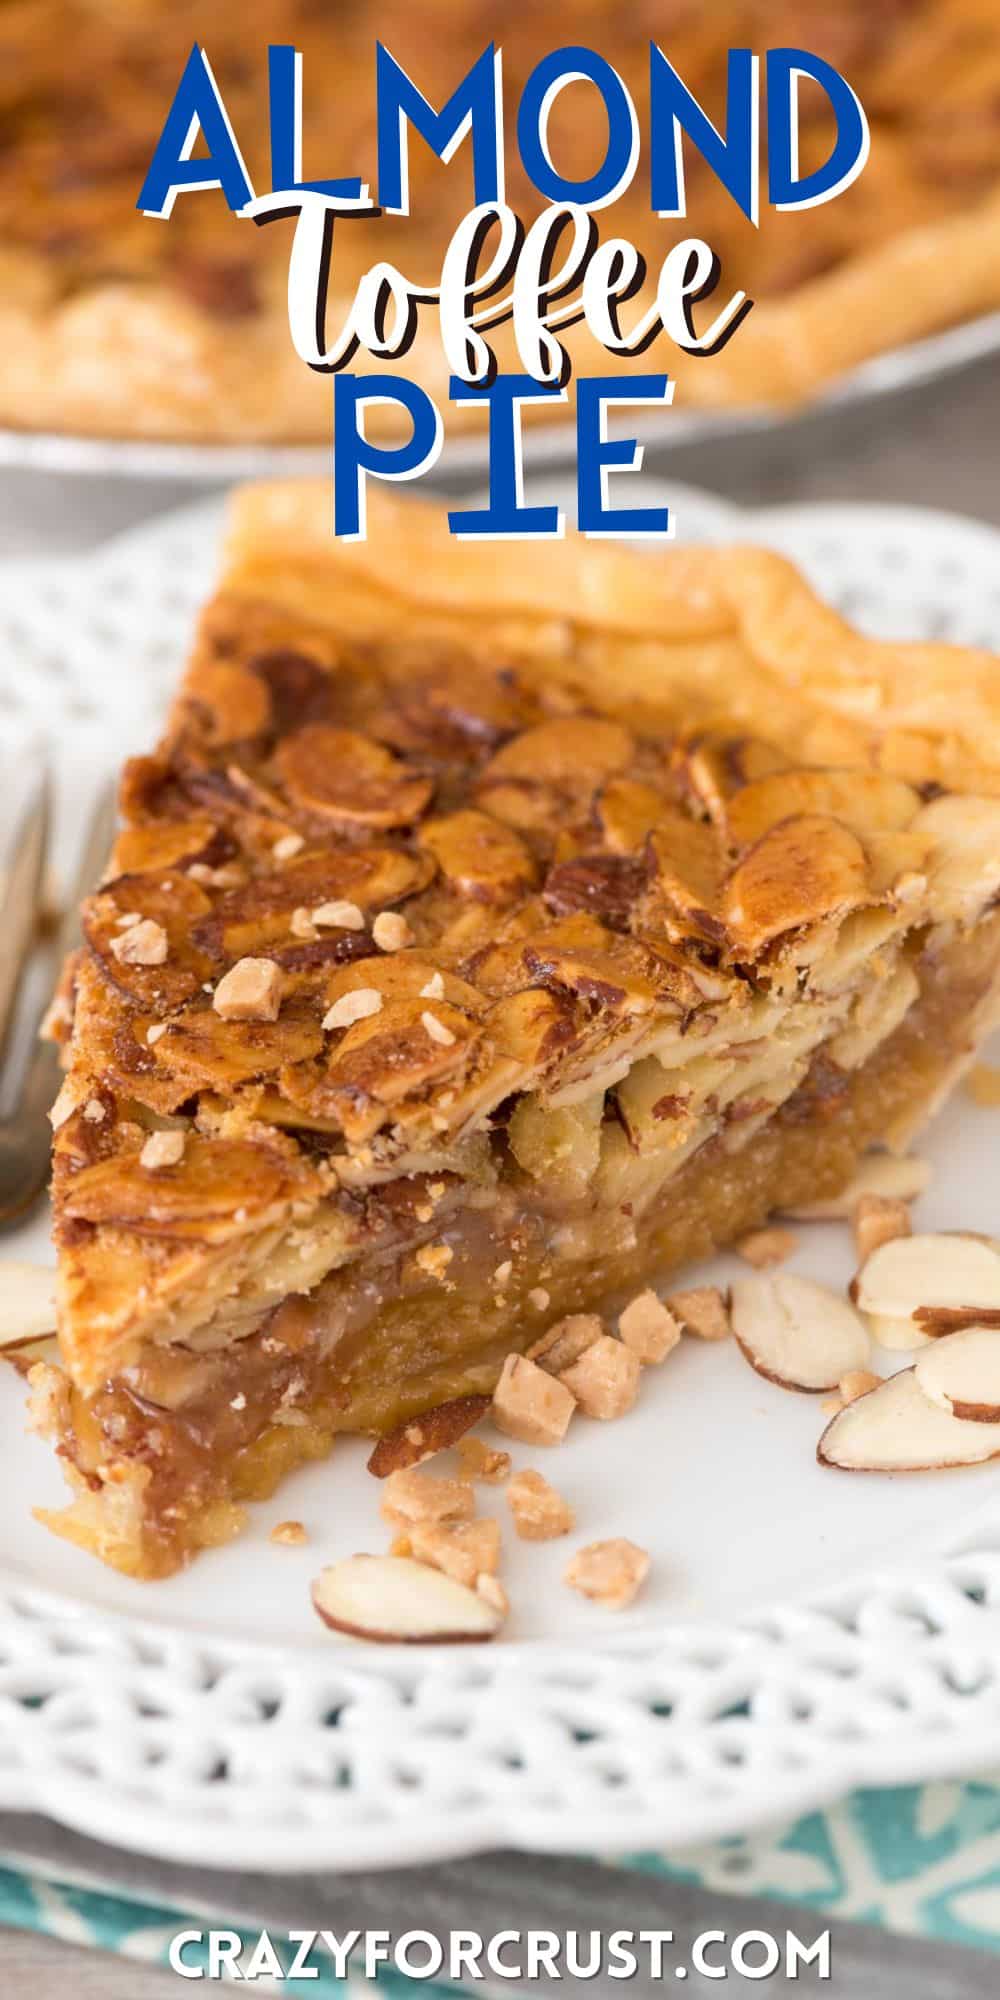 one slice of pie on a white plate with sliced almonds all around with words on the image.